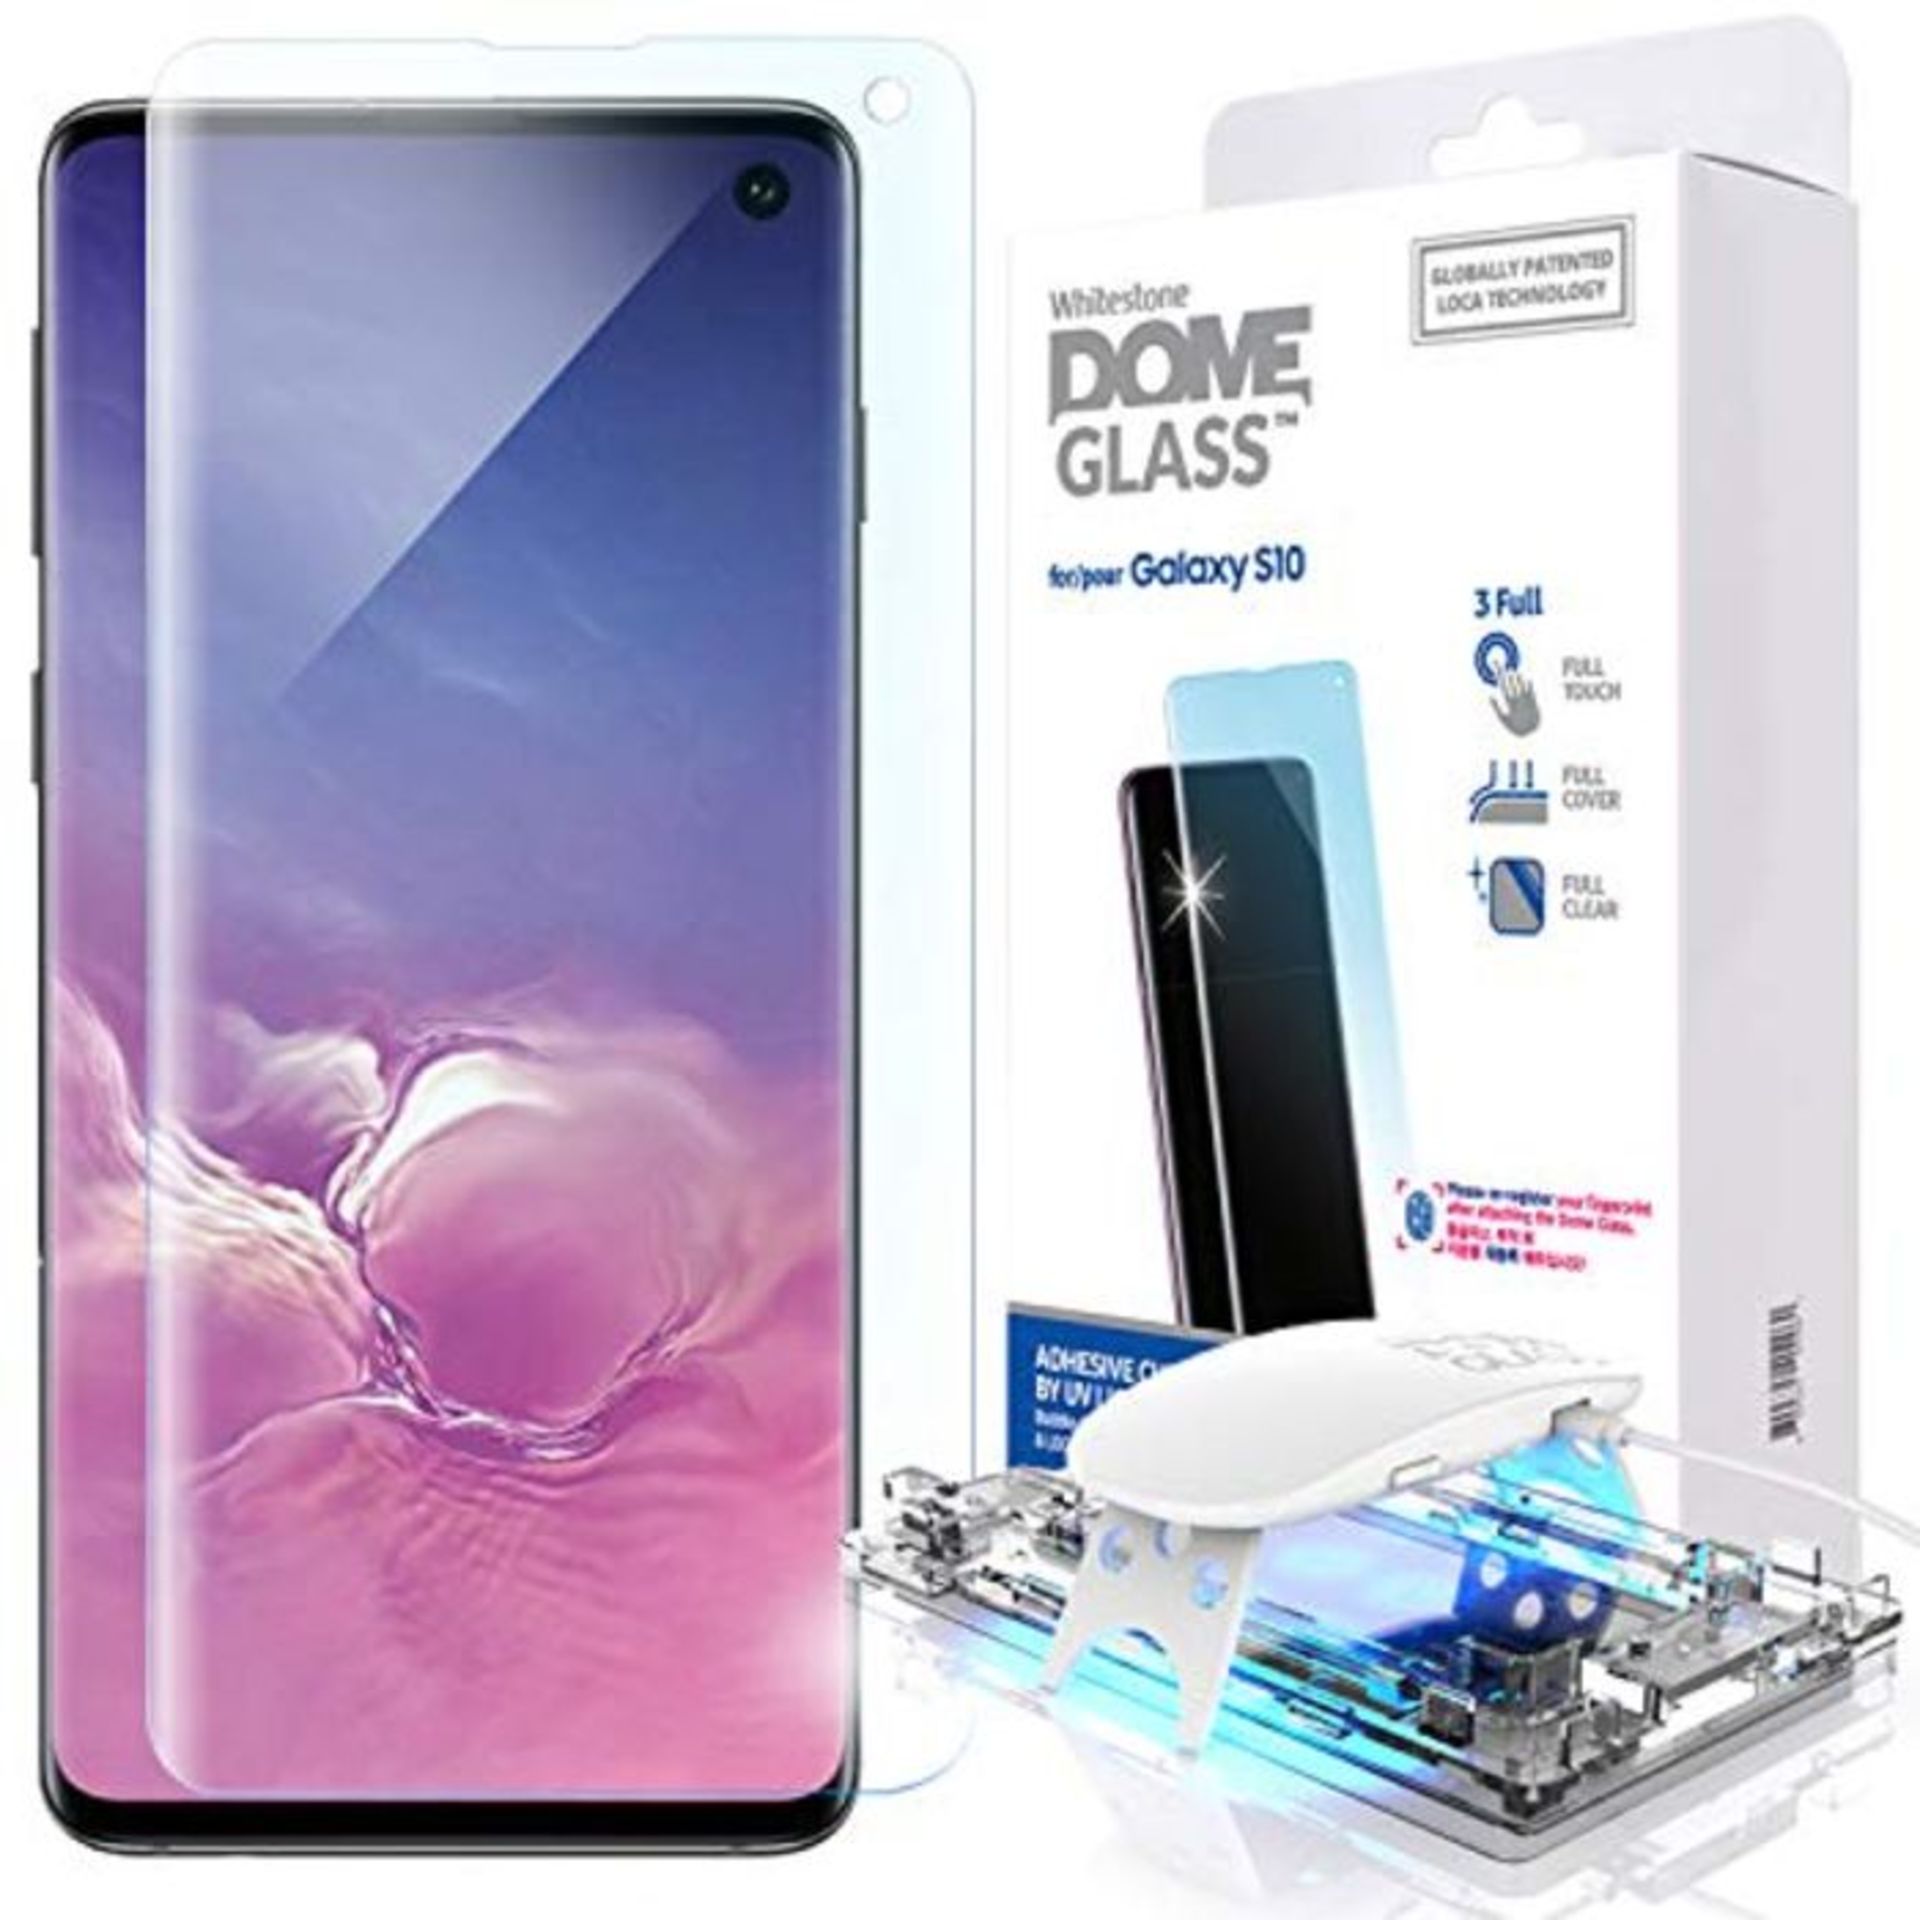 Galaxy S10 Screen Protector, [Dome Glass] Full 3D Curved Edge Tempered Glass [Unique S